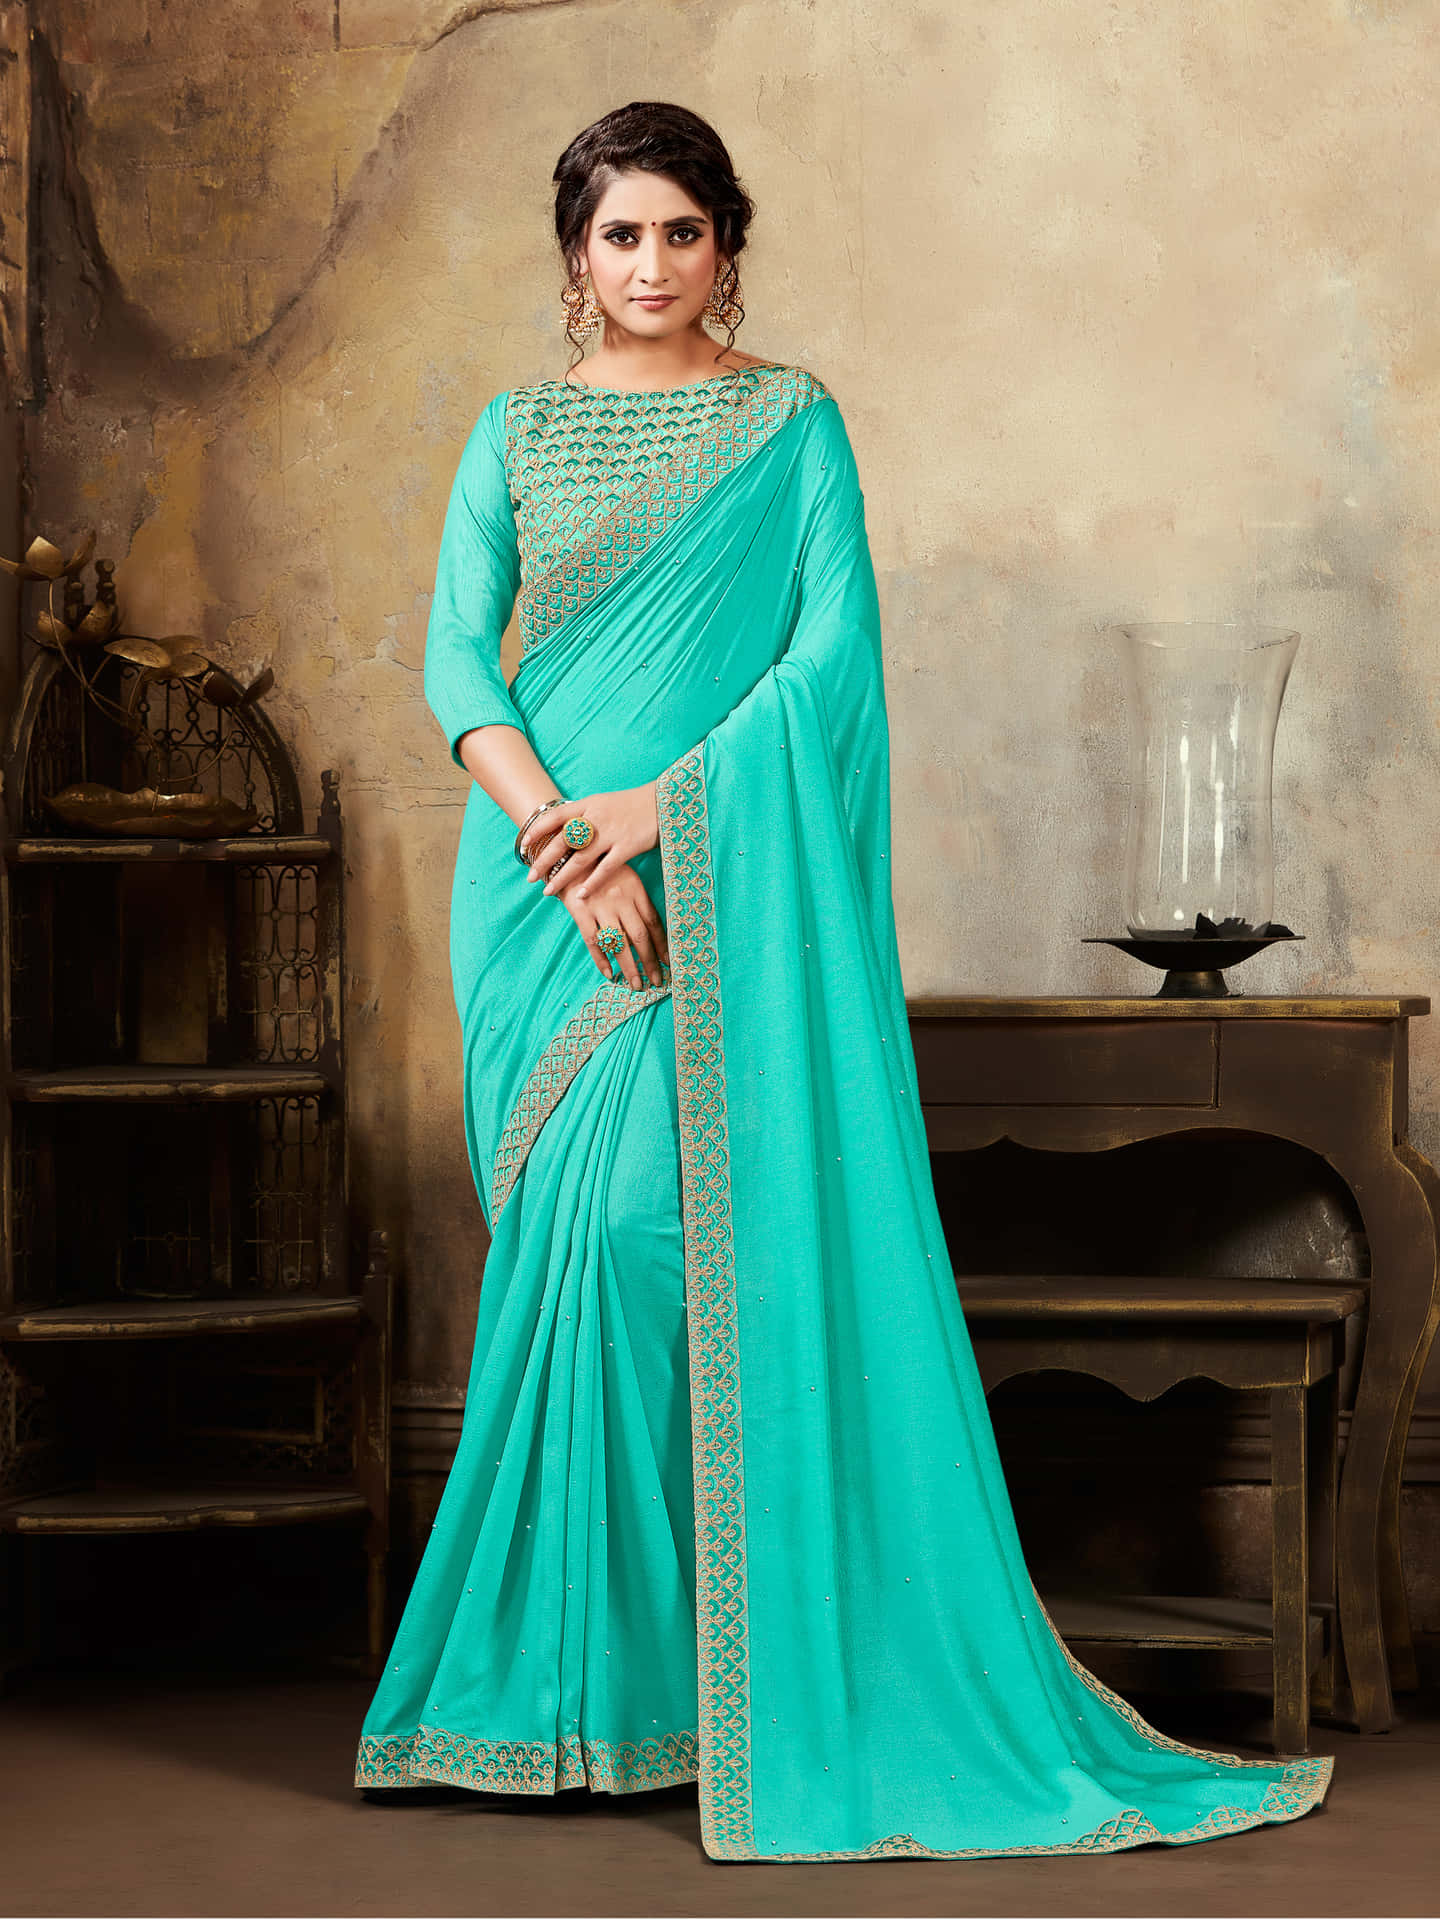 A Beautiful Turquoise Colored Saree With Embroidered Border